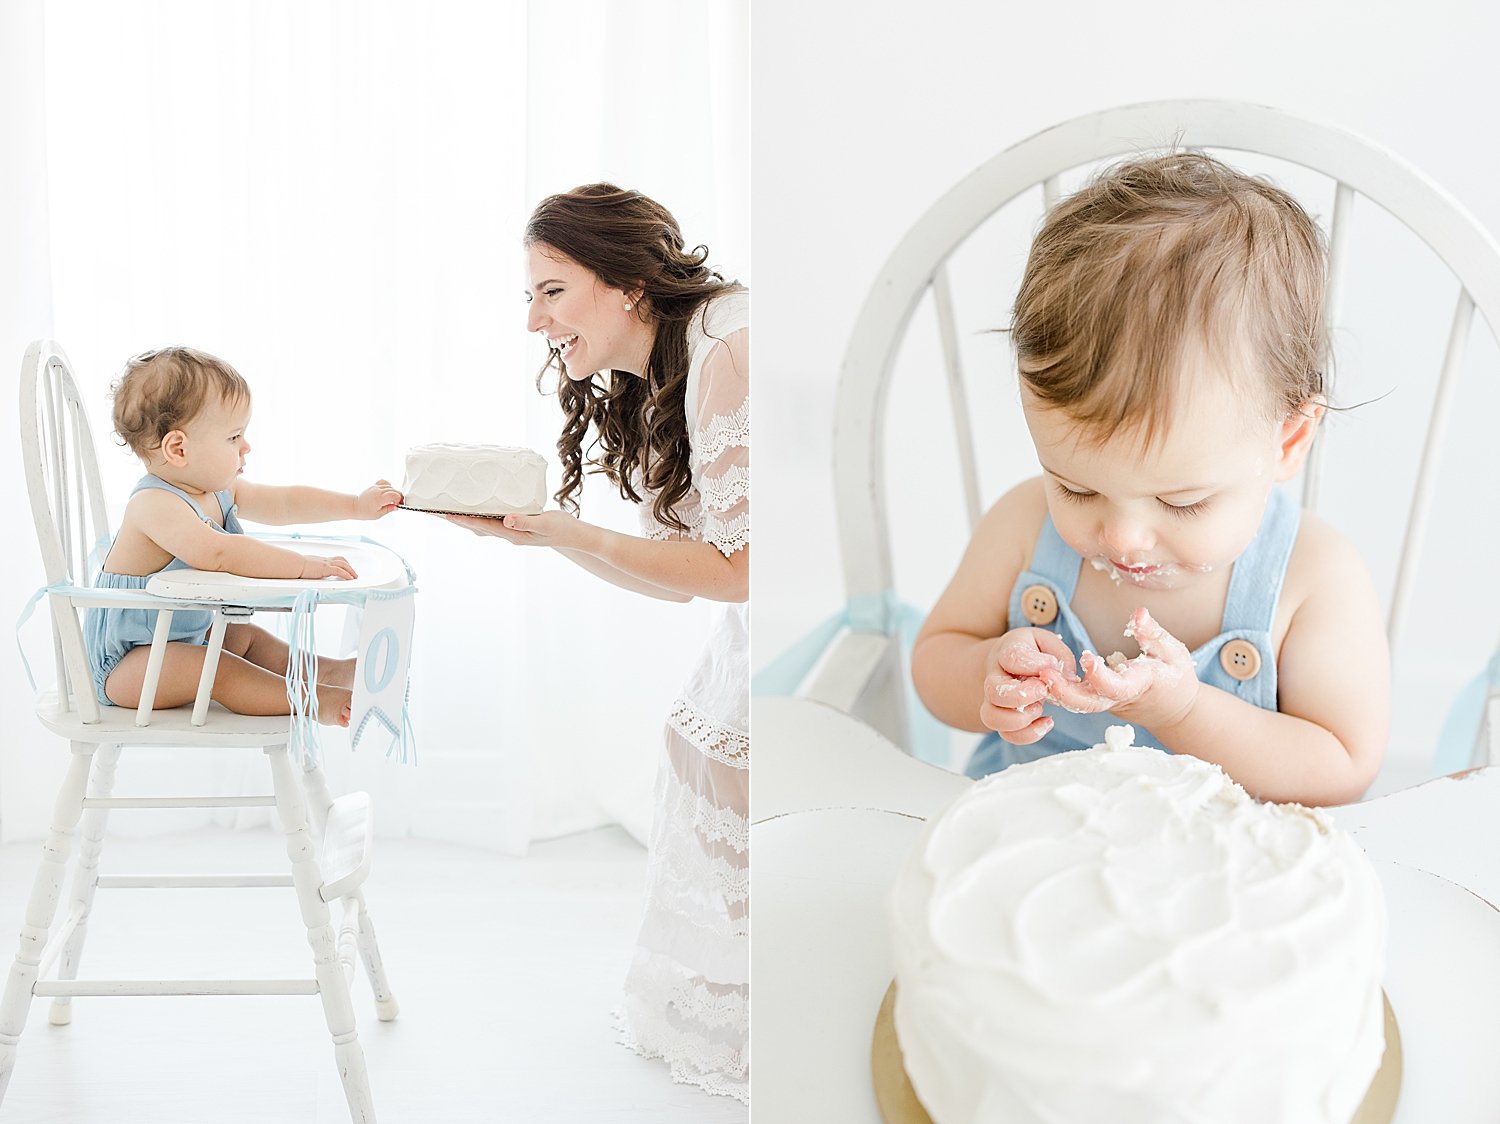 Why You Should Hire a Photographer for Your Baby's First Year | Cake smash during first birthday session in studio in Westport, CT | Kristin Wood Photography